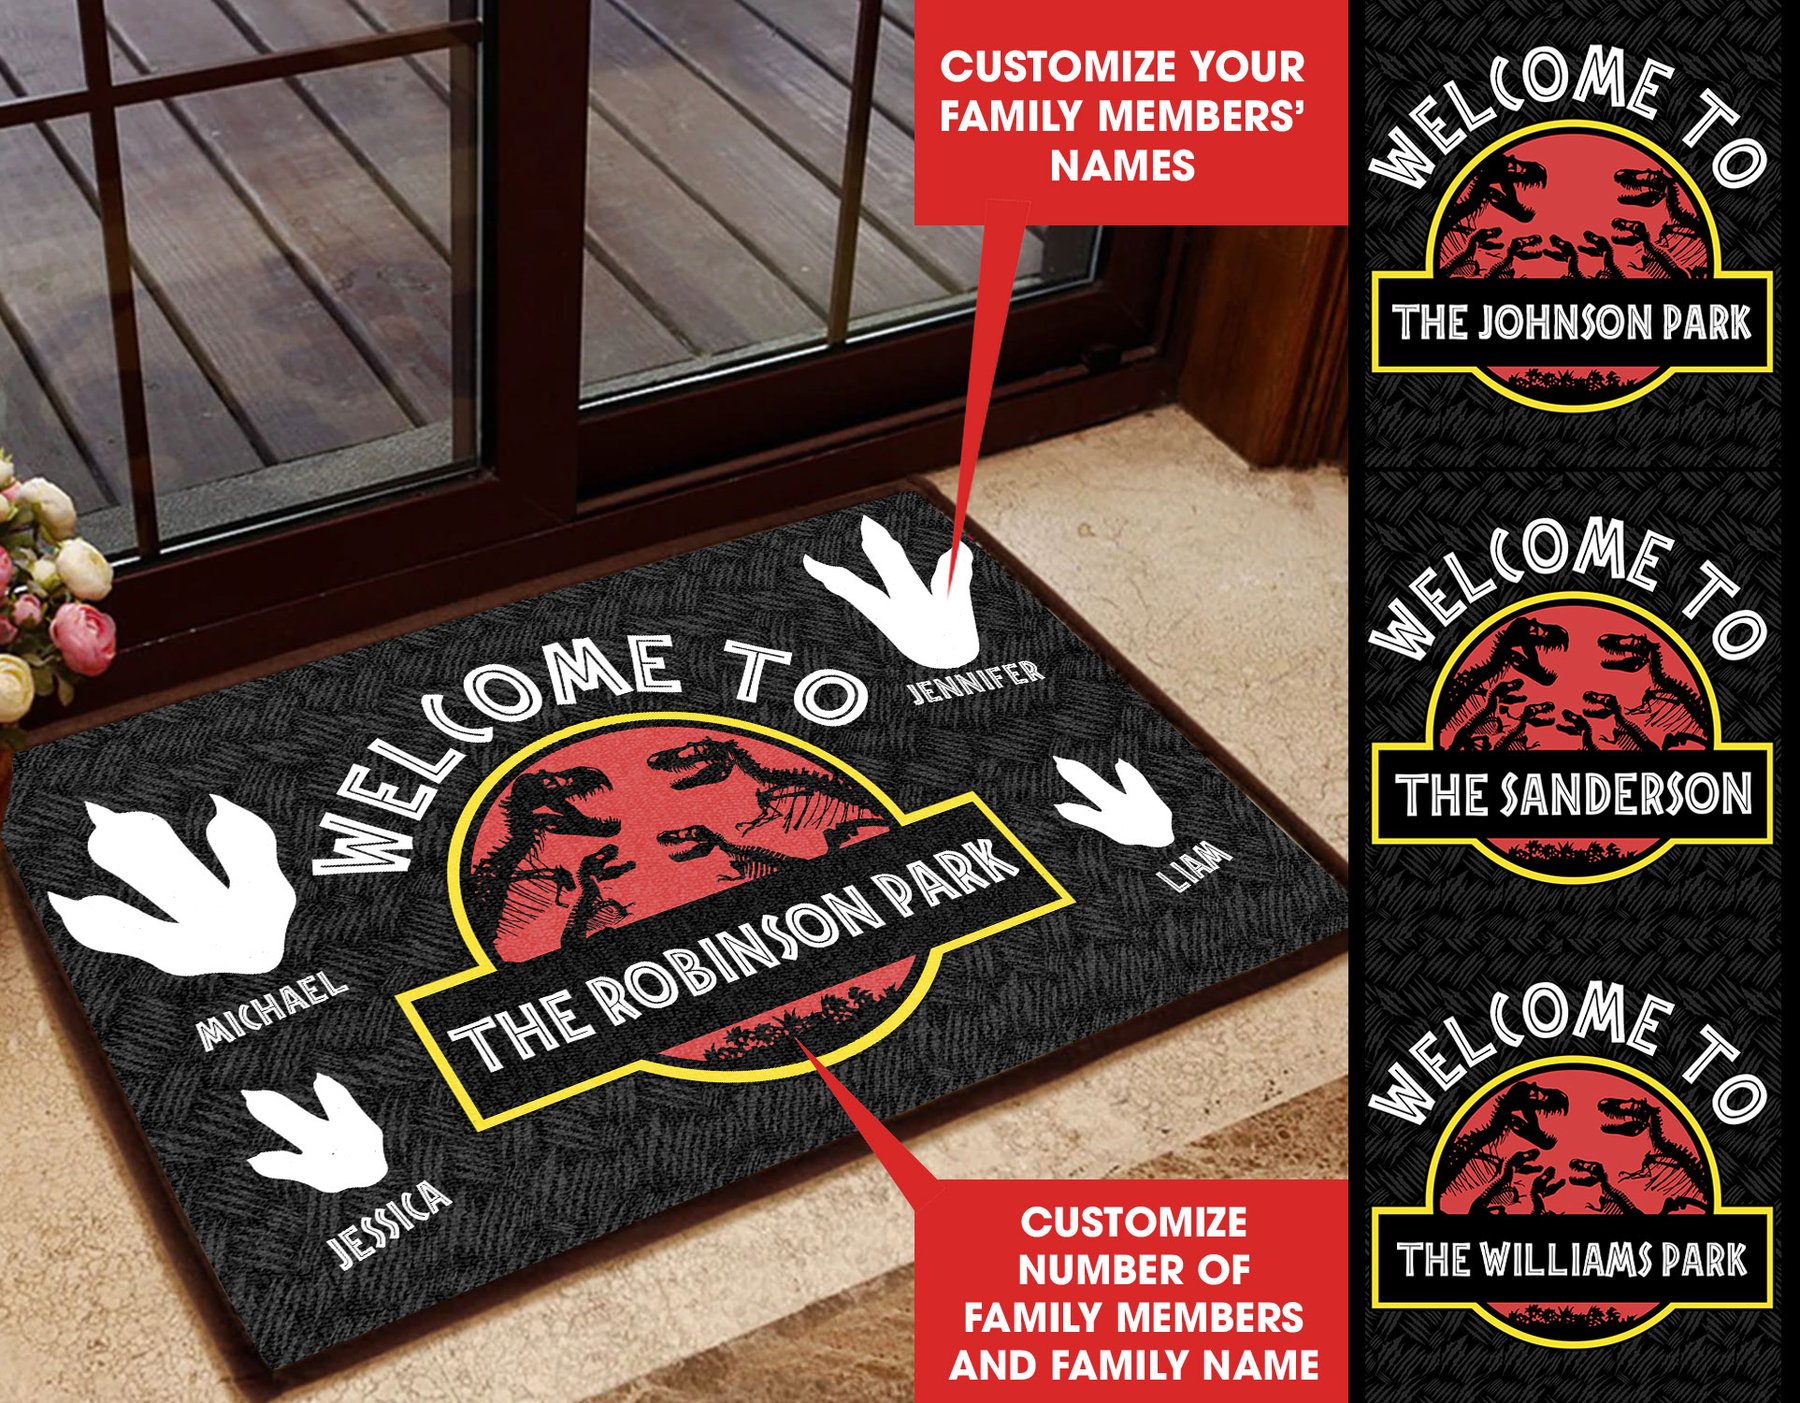 Welcome to Jurassic Part Personalized custom doormat – LIMITED EDITION